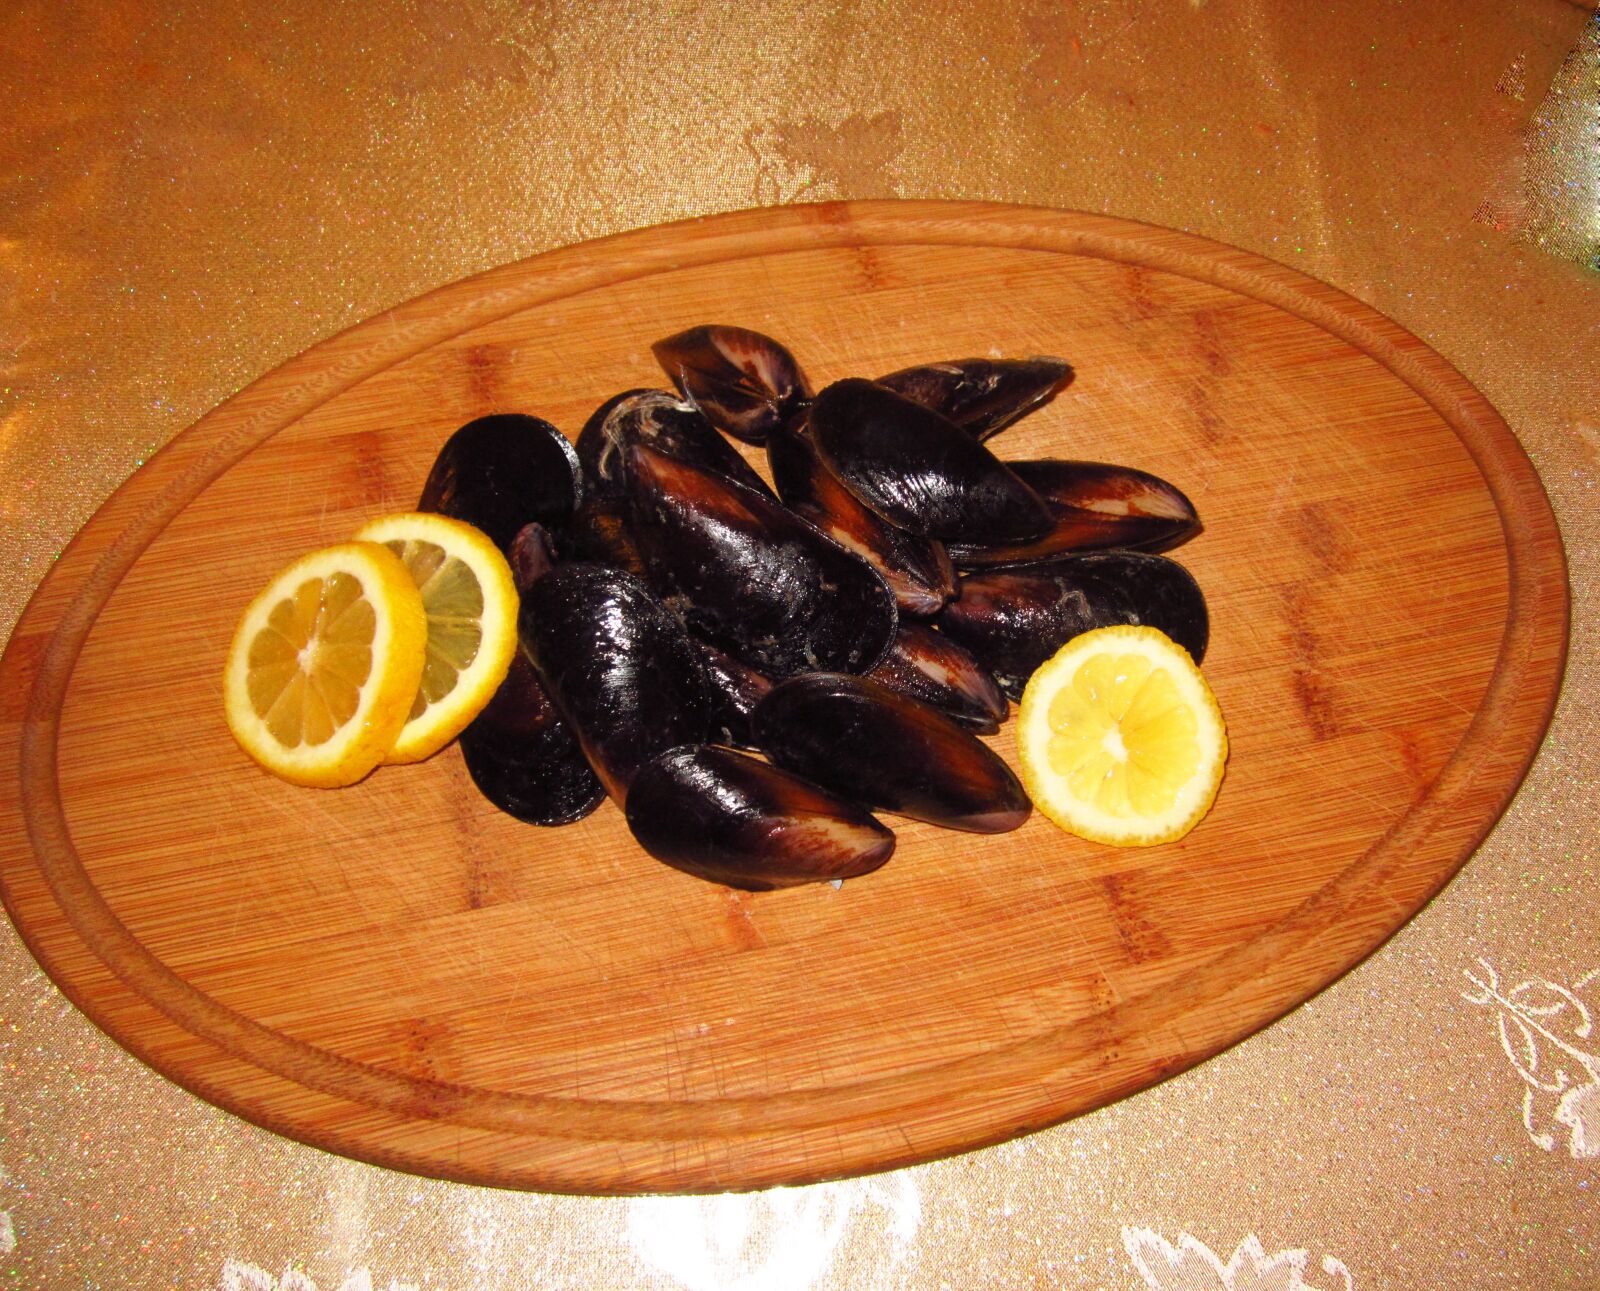 Canon PowerShot A2200 sample photo. Mussels, shelled, marine photography